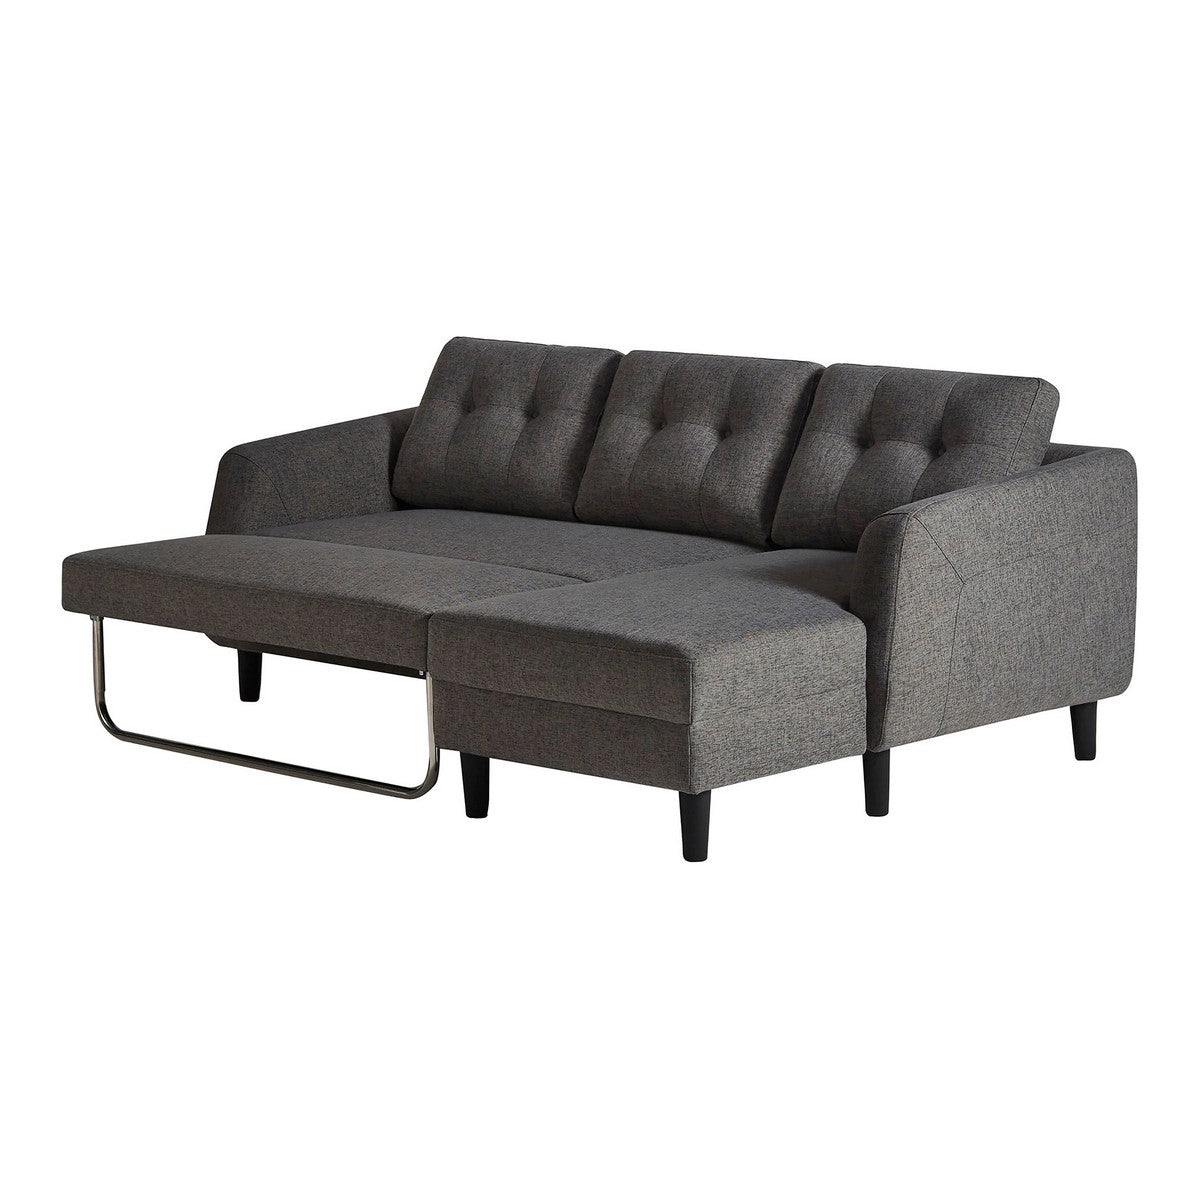 Moe's Home Collection Belagio Sofa Bed With Chaise Charcoal Right - MT-1019-07-R